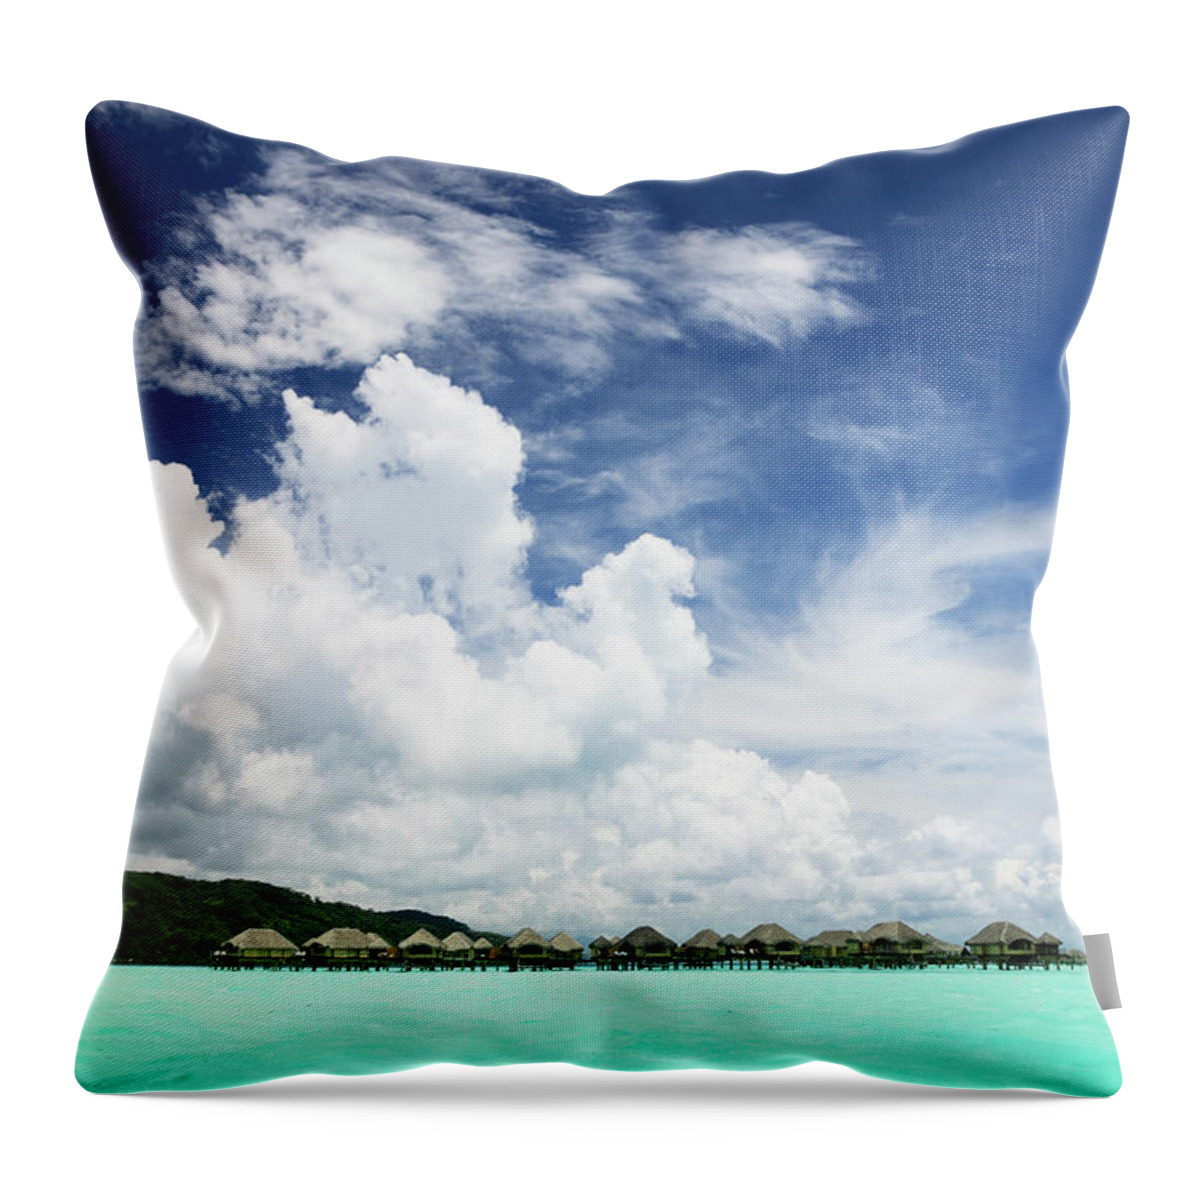 Standing Water Throw Pillow featuring the photograph Blue Lagoon Holiday Luxury Resort by Mlenny